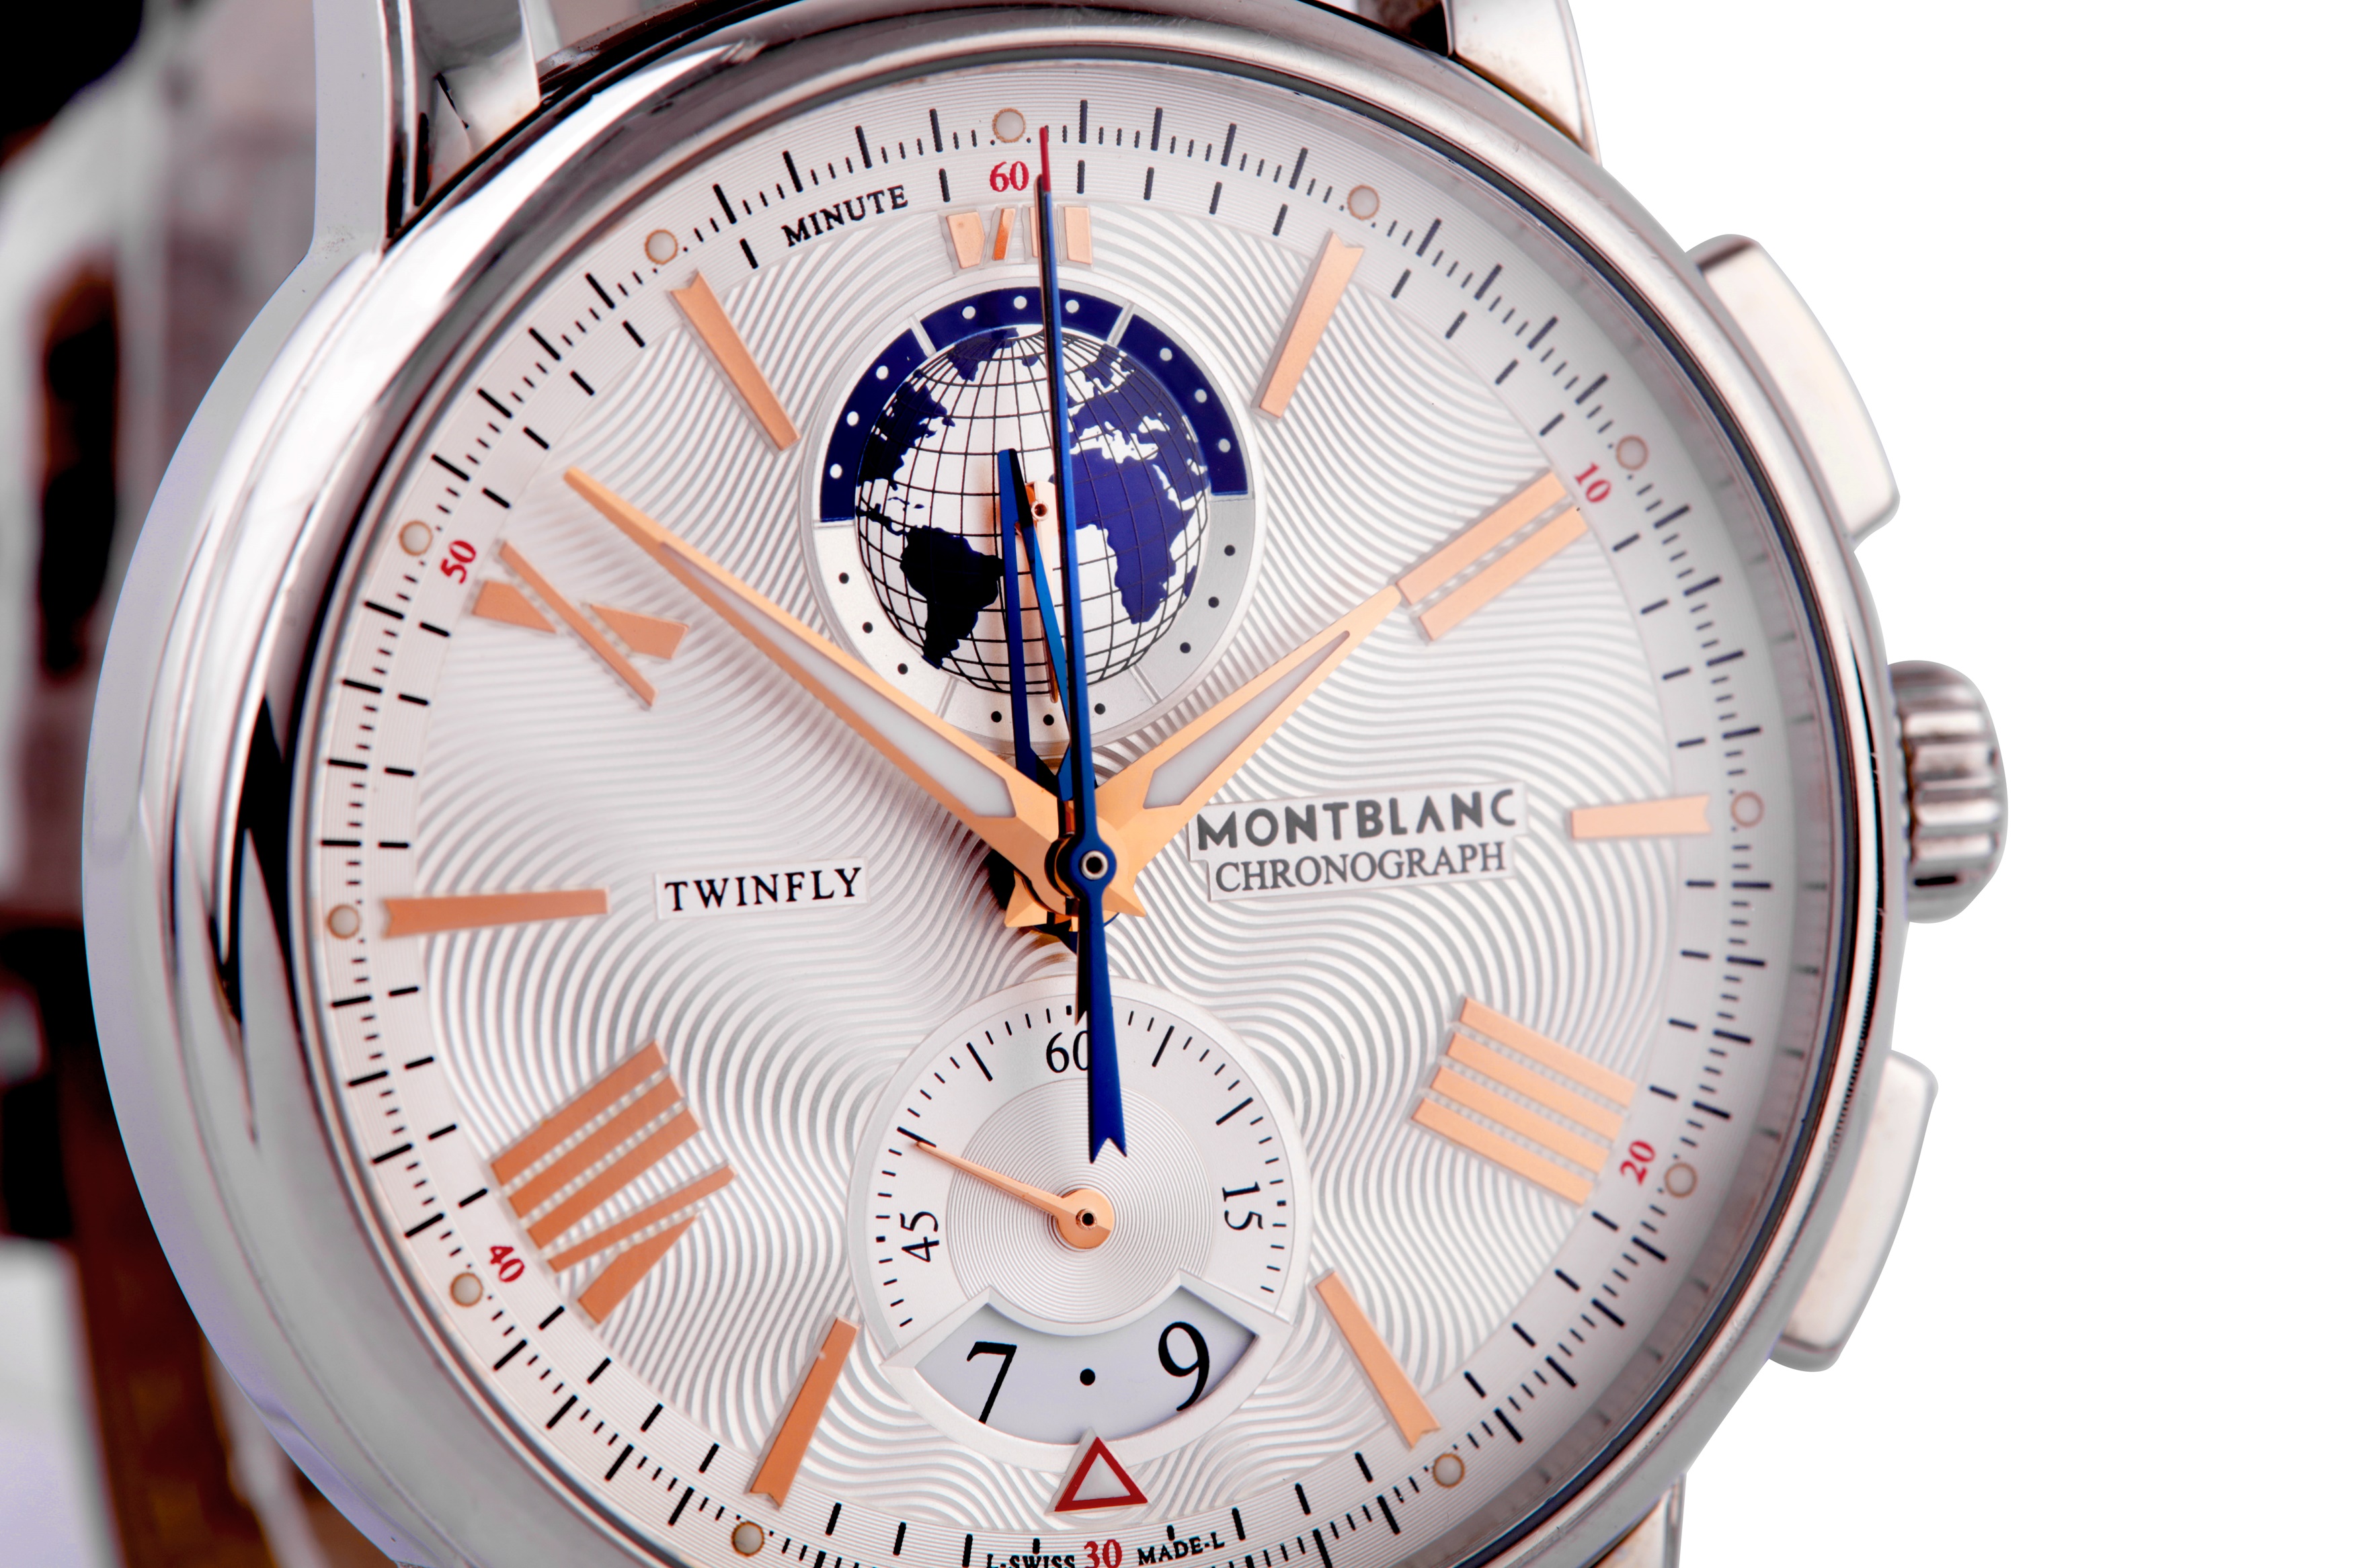 MONTBLANC. 4810 TWINFLY CHRONOGRAPH 110 YEARS EDITION - Image 6 of 8